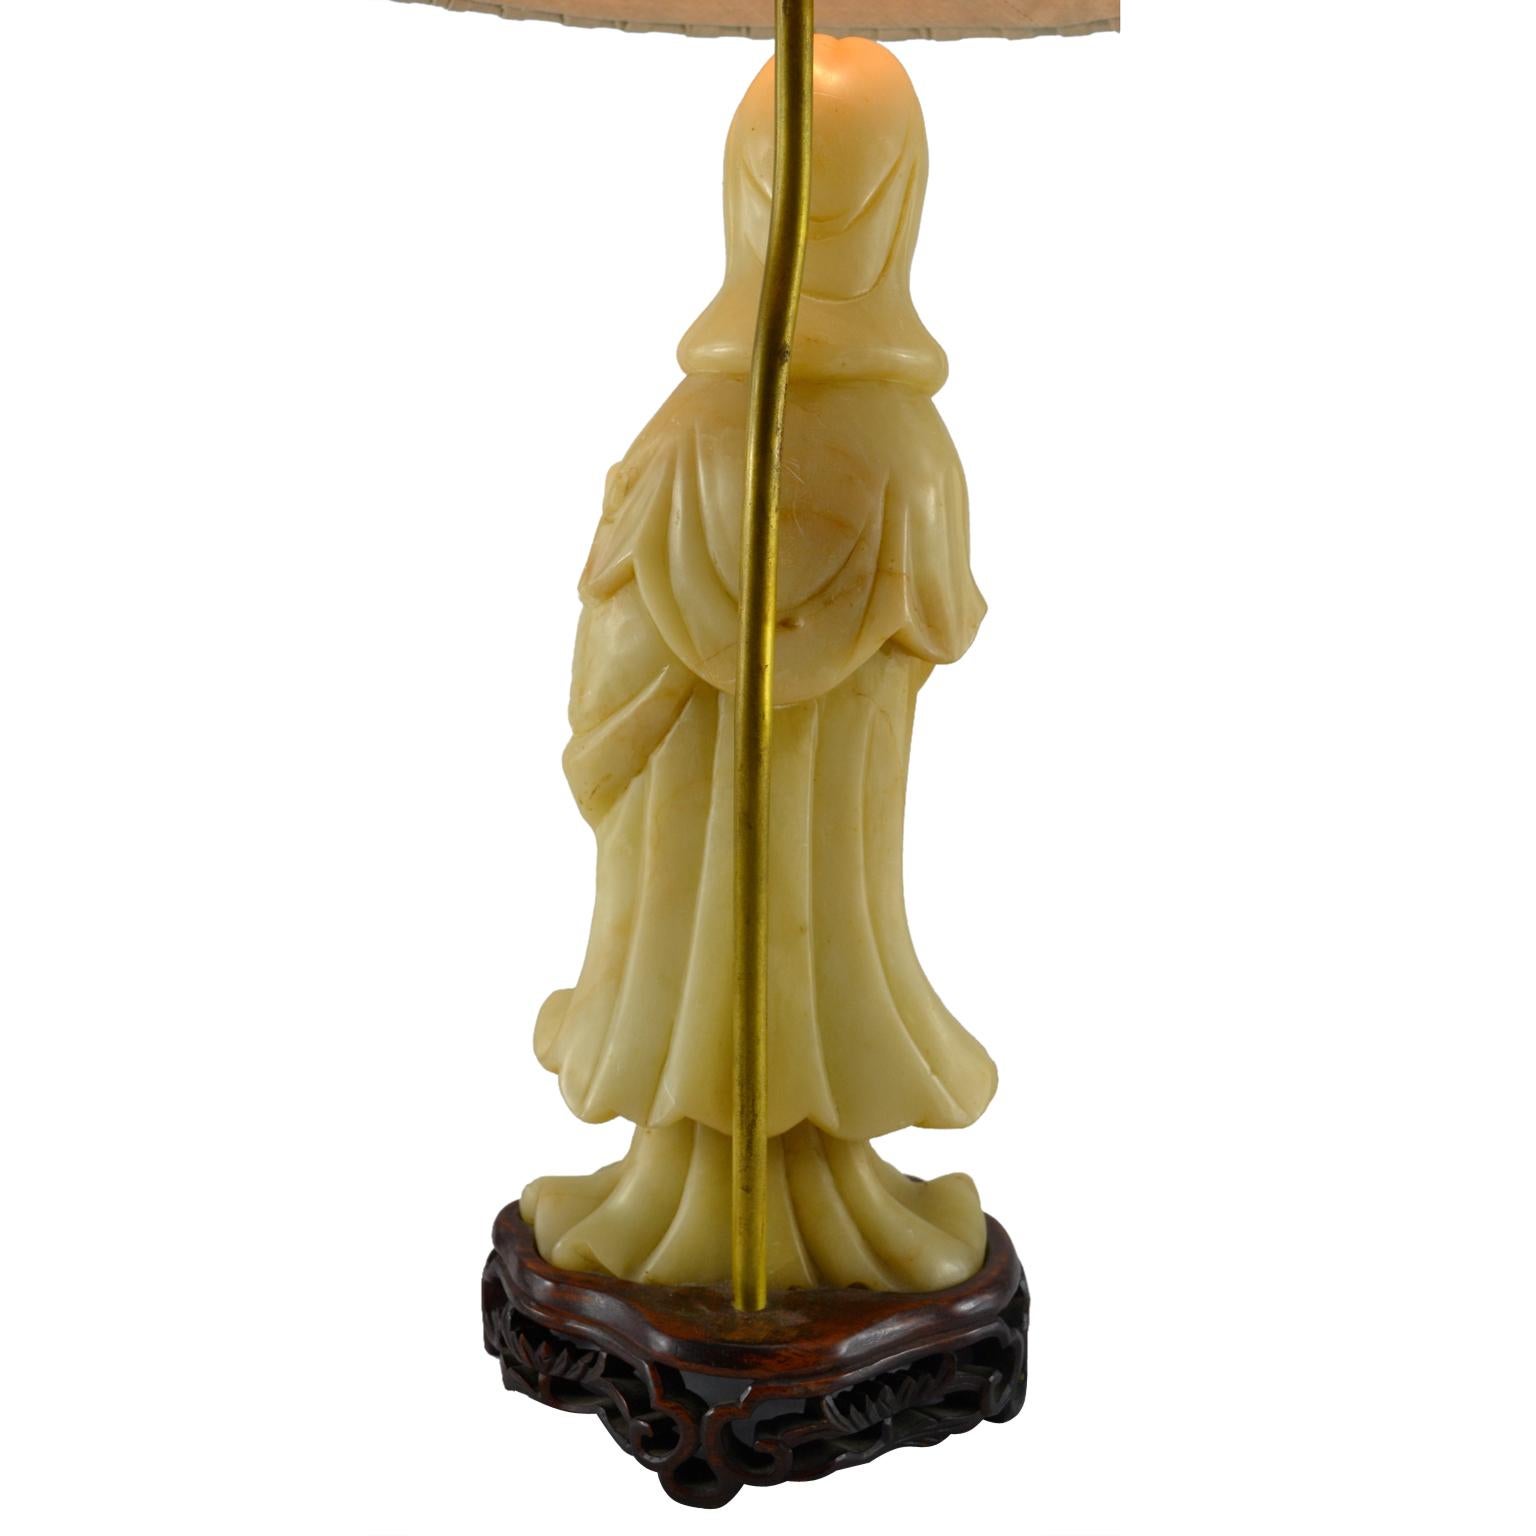 Aesthetic Movement Early 20 Century Chinese Soapstone Figurative Lamp of Guanyin